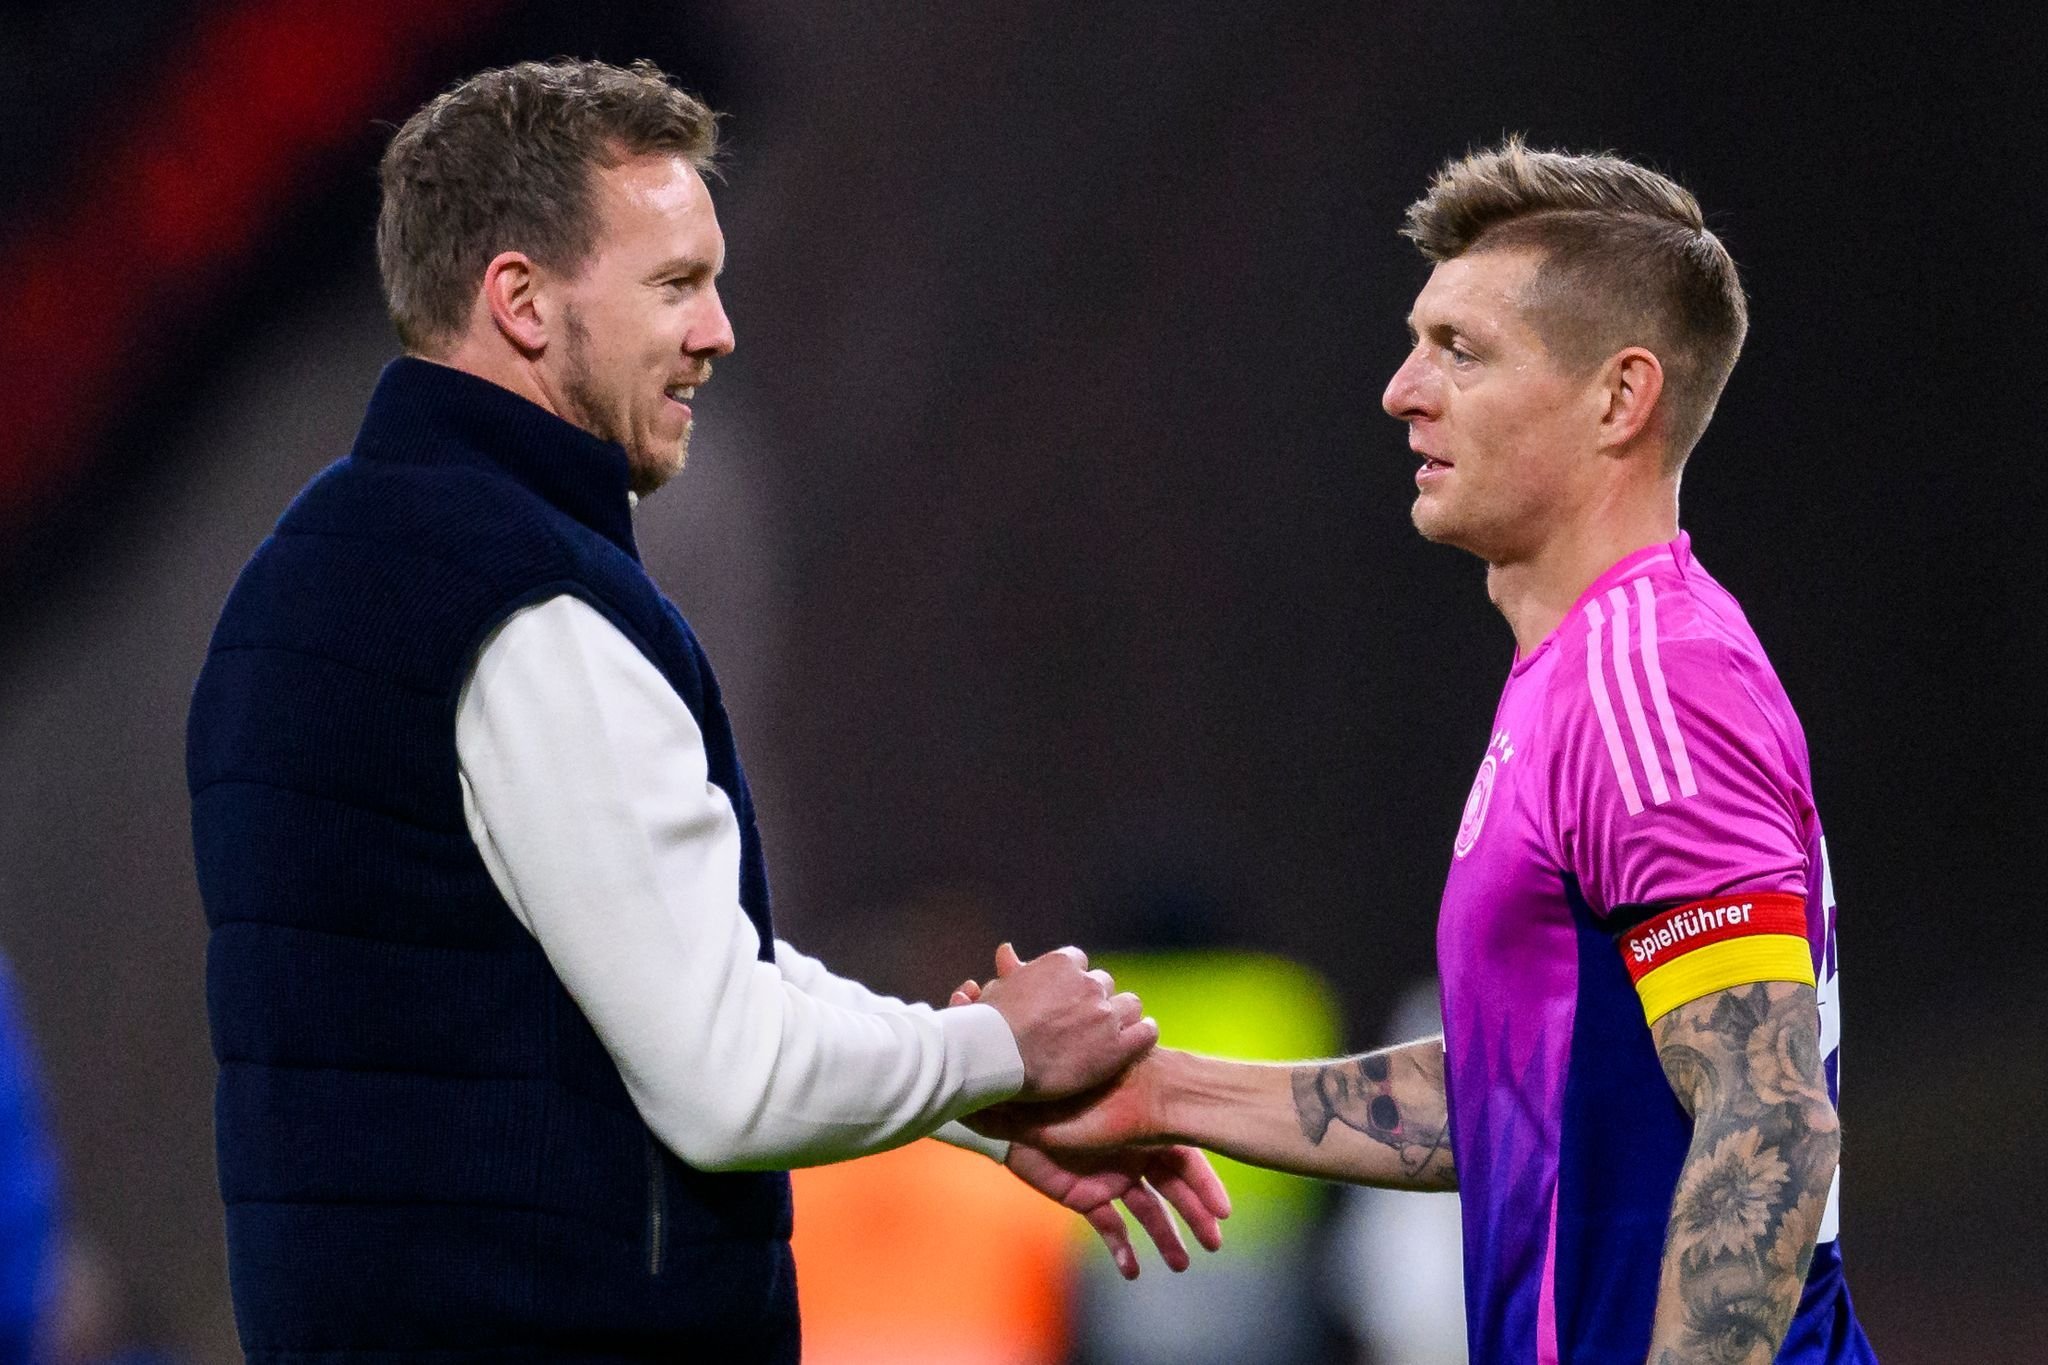 Royal Kroos quits after EM: “I’m glad and unhappy”